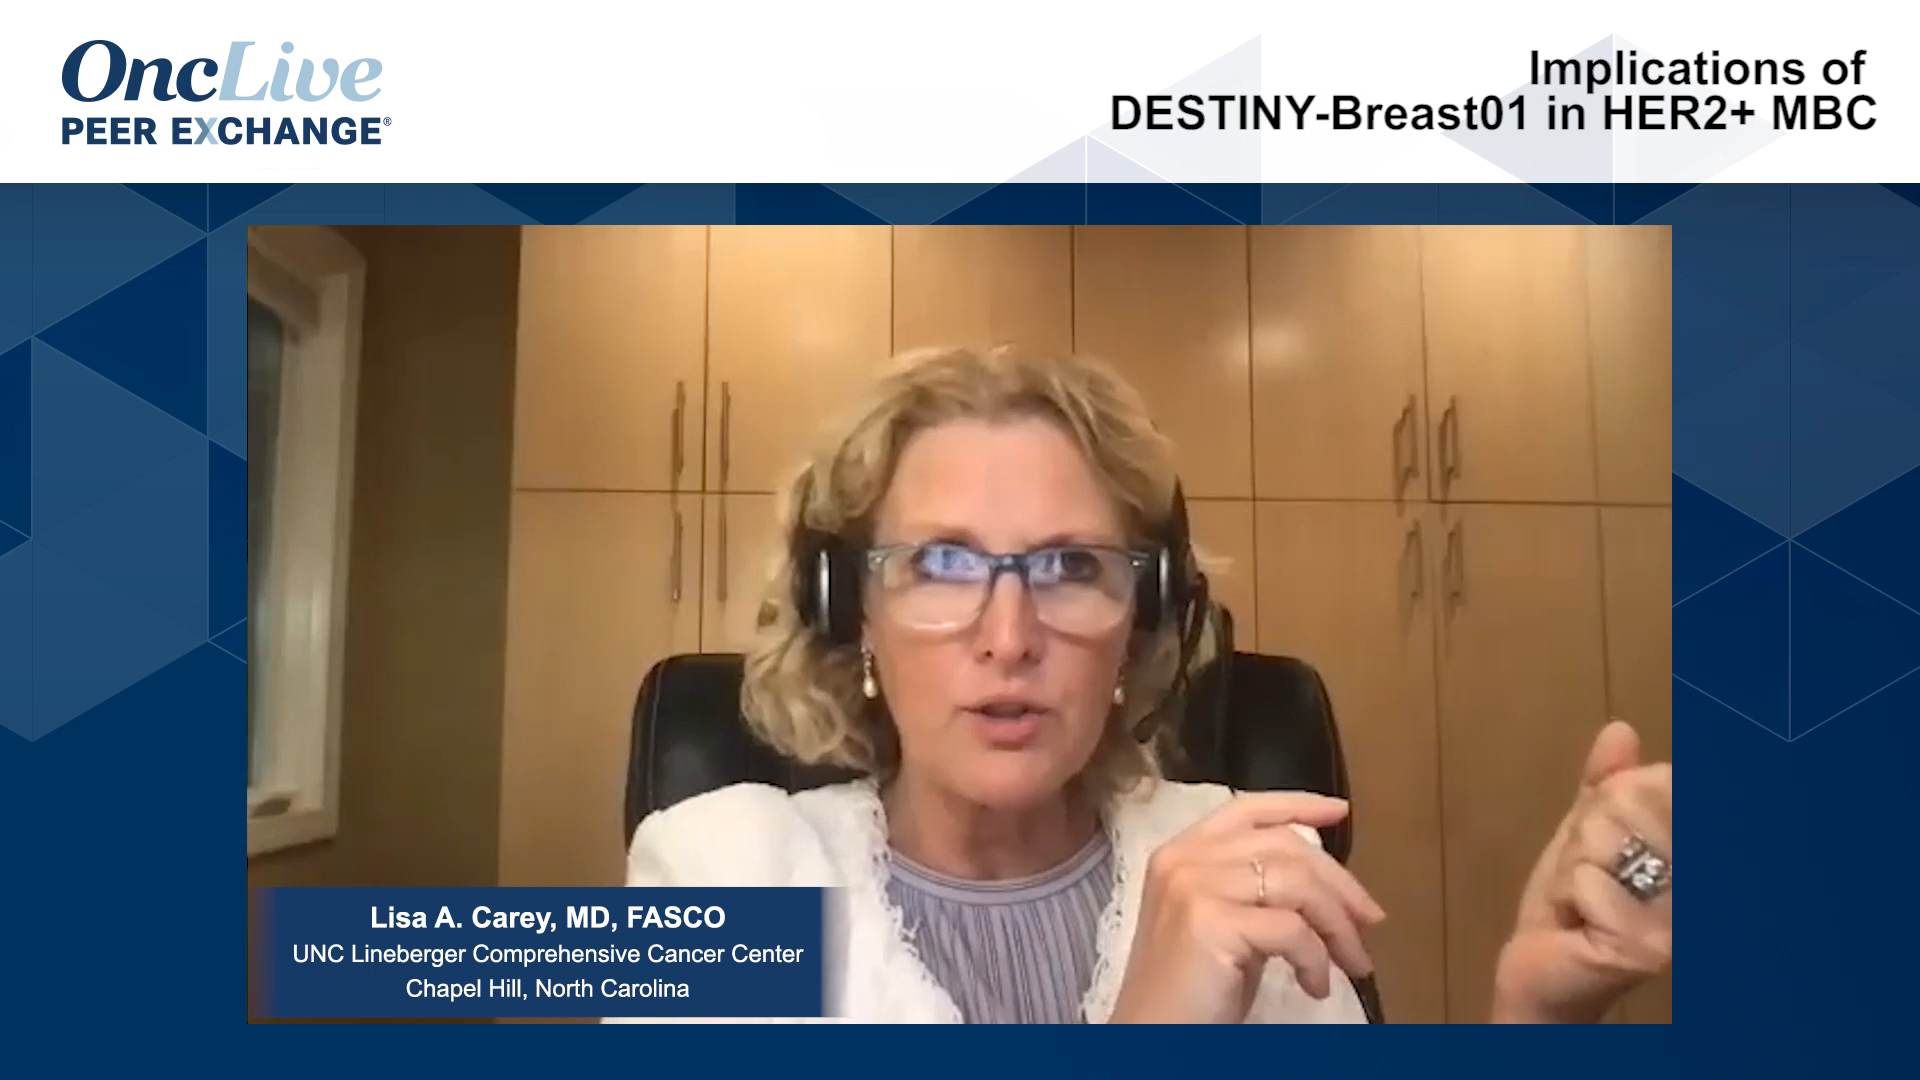 Implications of DESTINY-Breast01 in HER2+ MBC